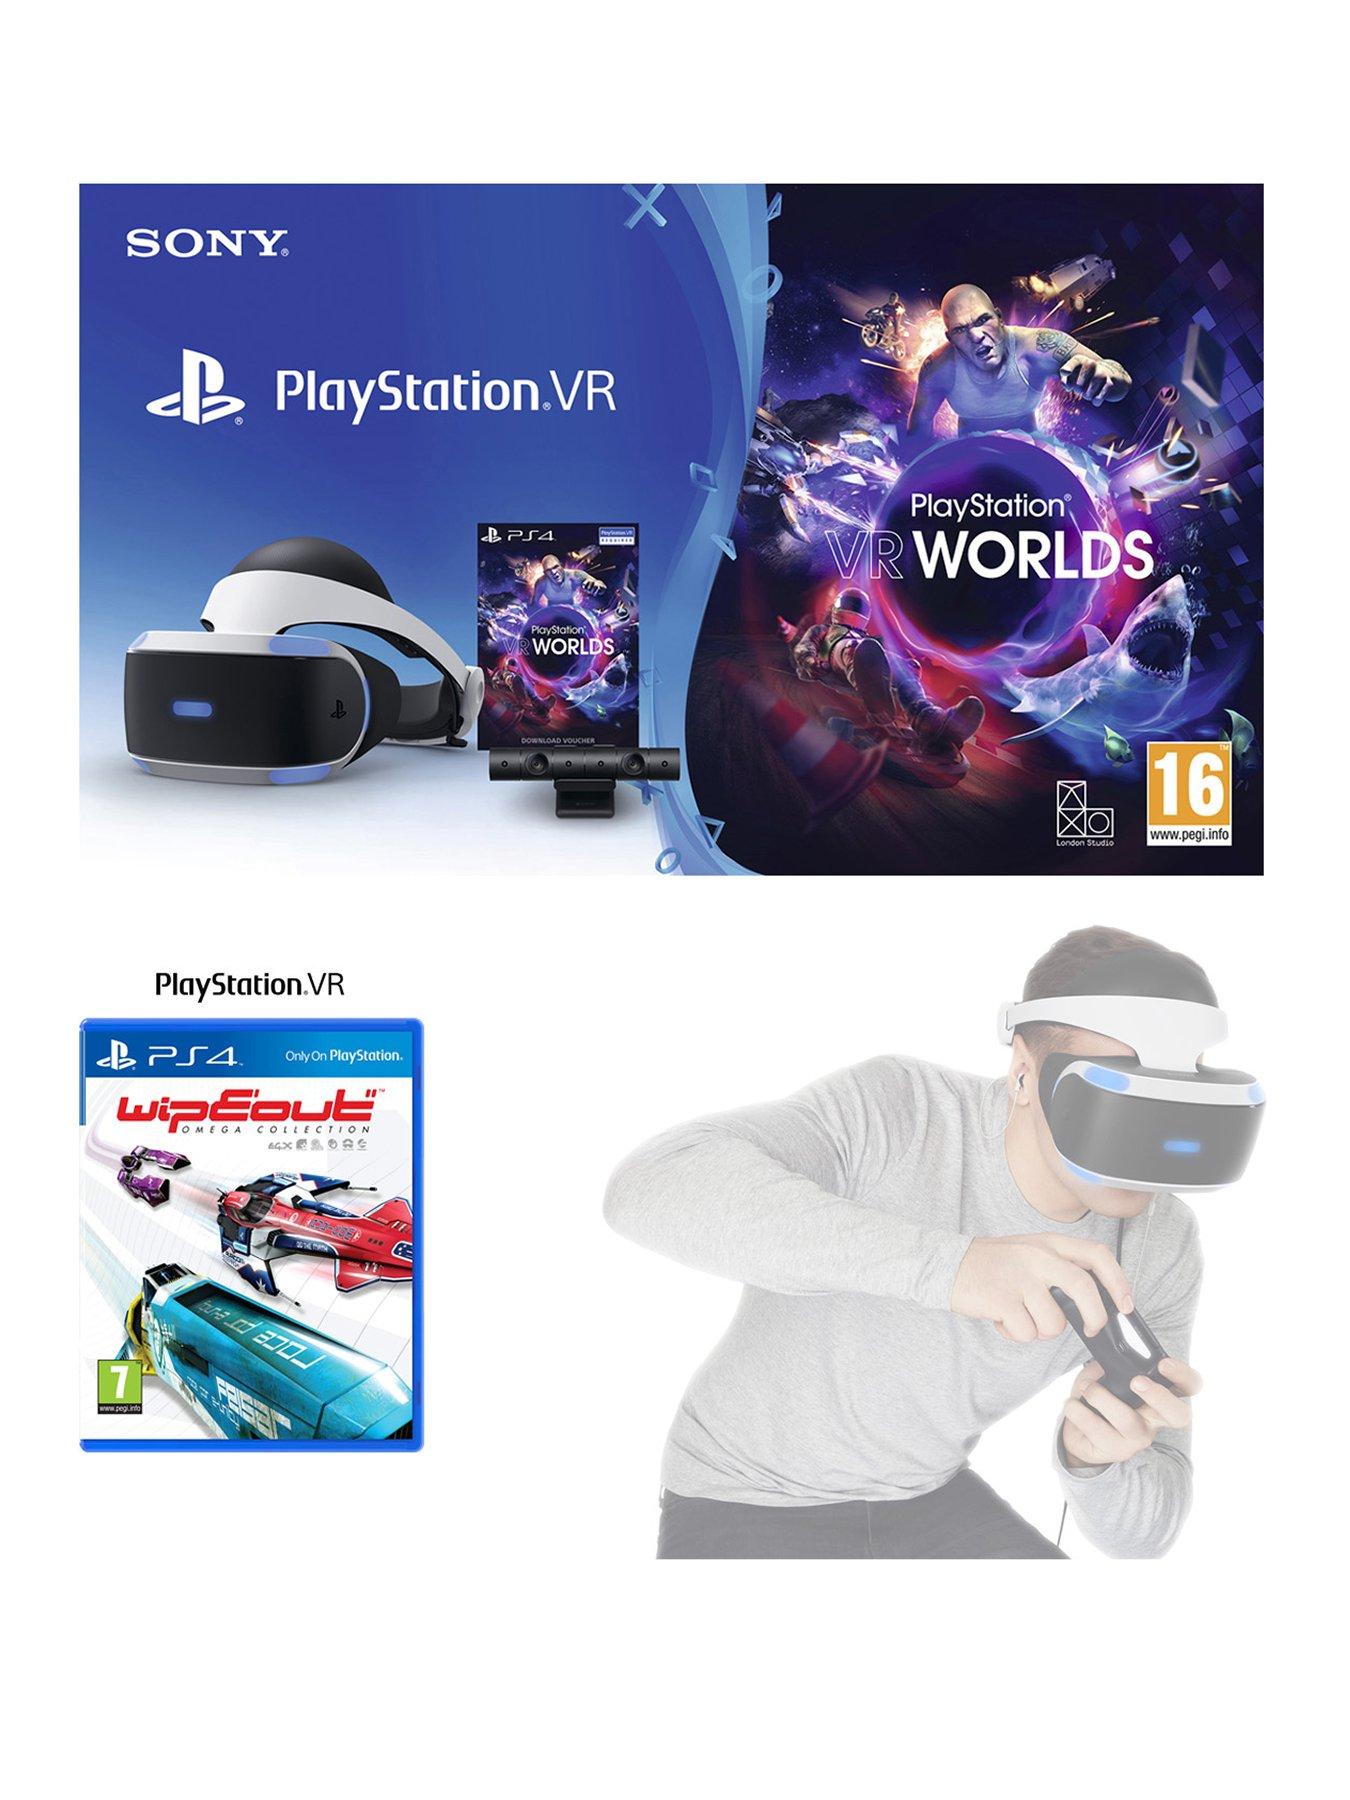 Playstation Vr Starter Pack With Wipeout Omega Collection And Optional Move Motion Controller – + Move Motion Controller